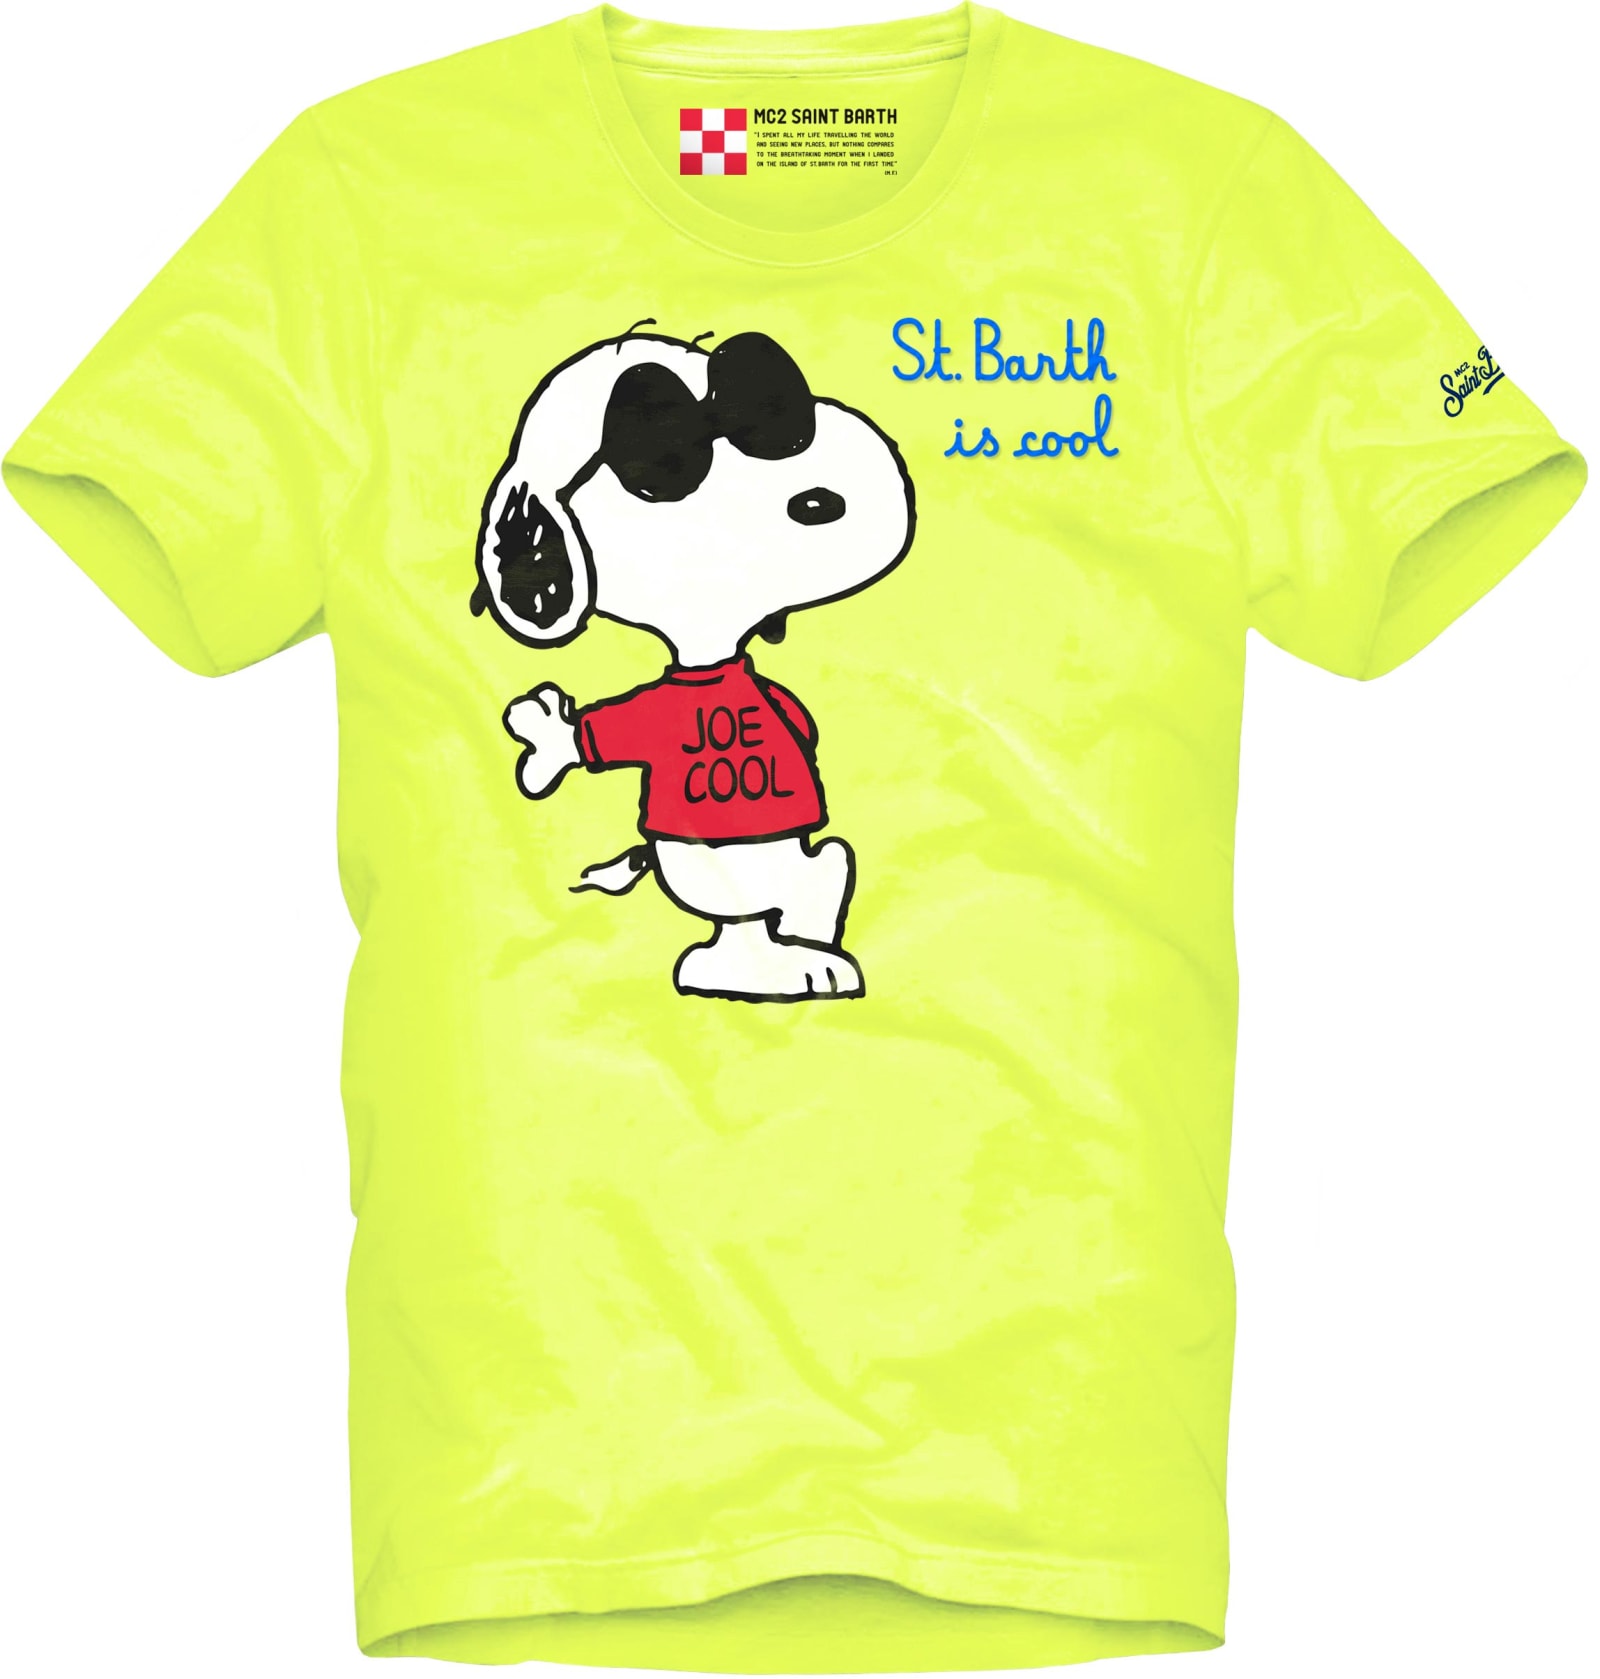 MC2 Saint Barth St Barth Is Cool Printed Fluo Yellow T-shirt - Peanuts Special Edition ®